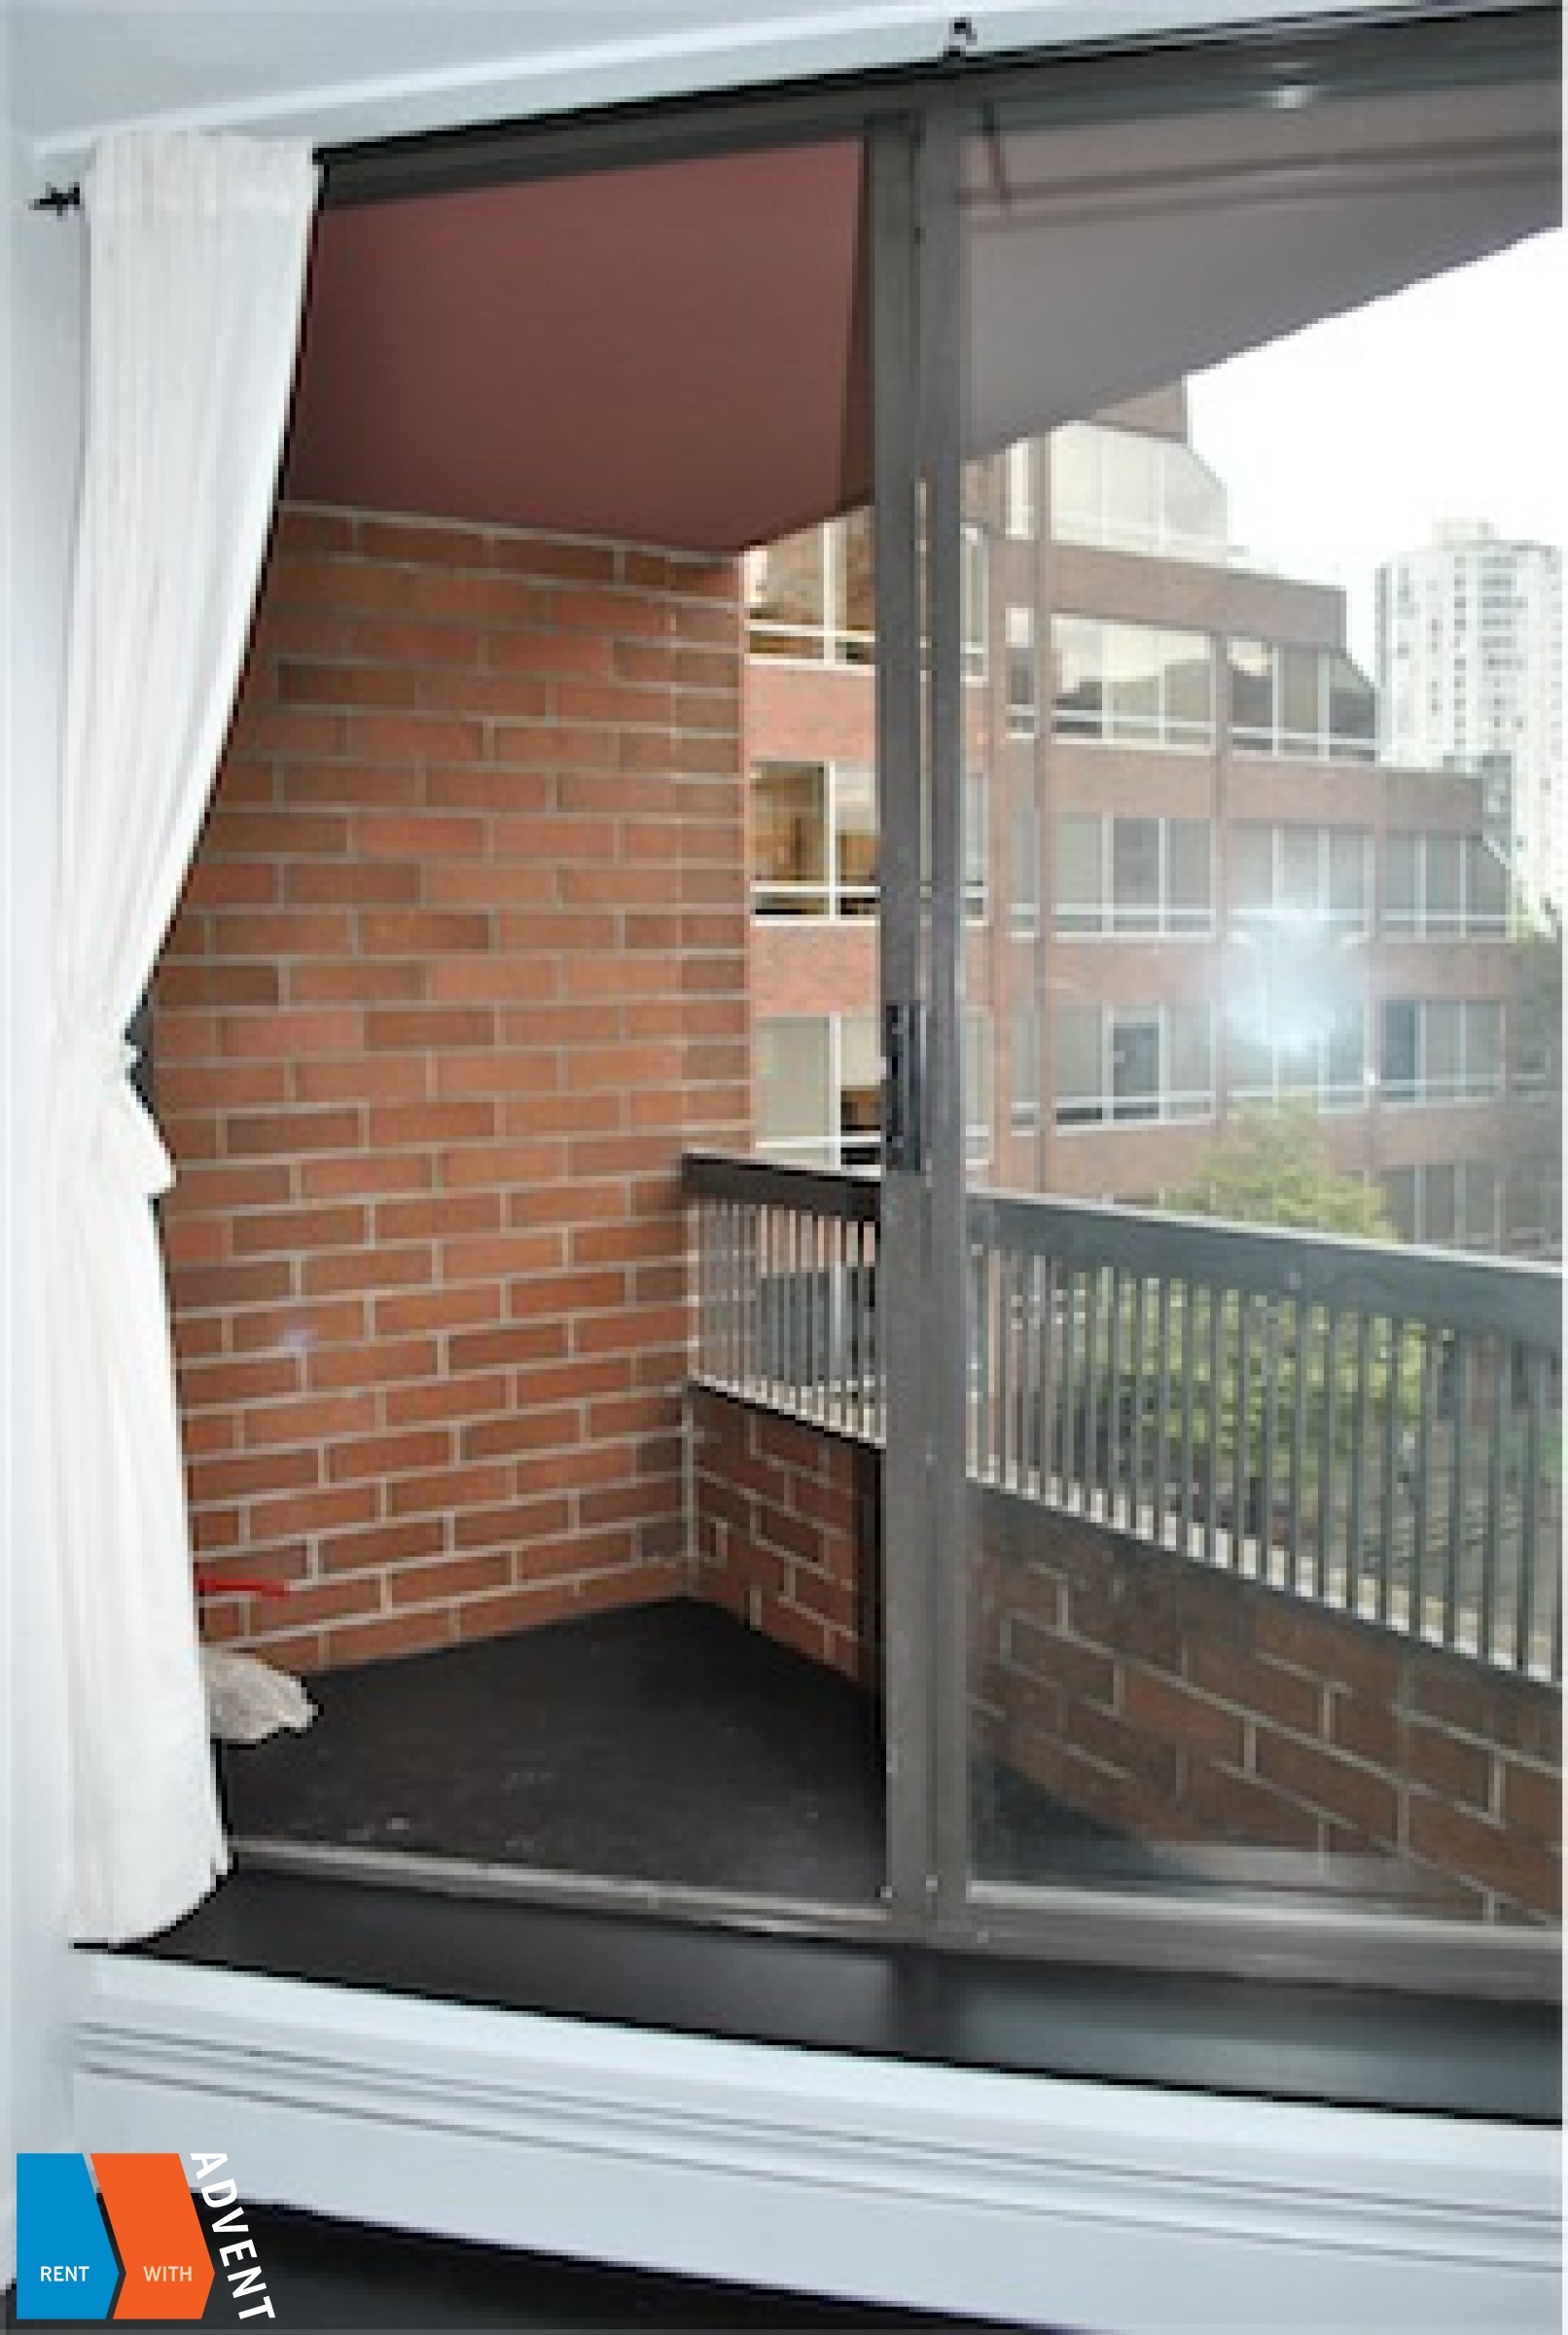 Anchor Point Unfurnished 4th Floor 1 Bedroom Apartment Rental in Downtown Vancouver. 414 - 1333 Hornby Street, Vancouver, BC, Canada.